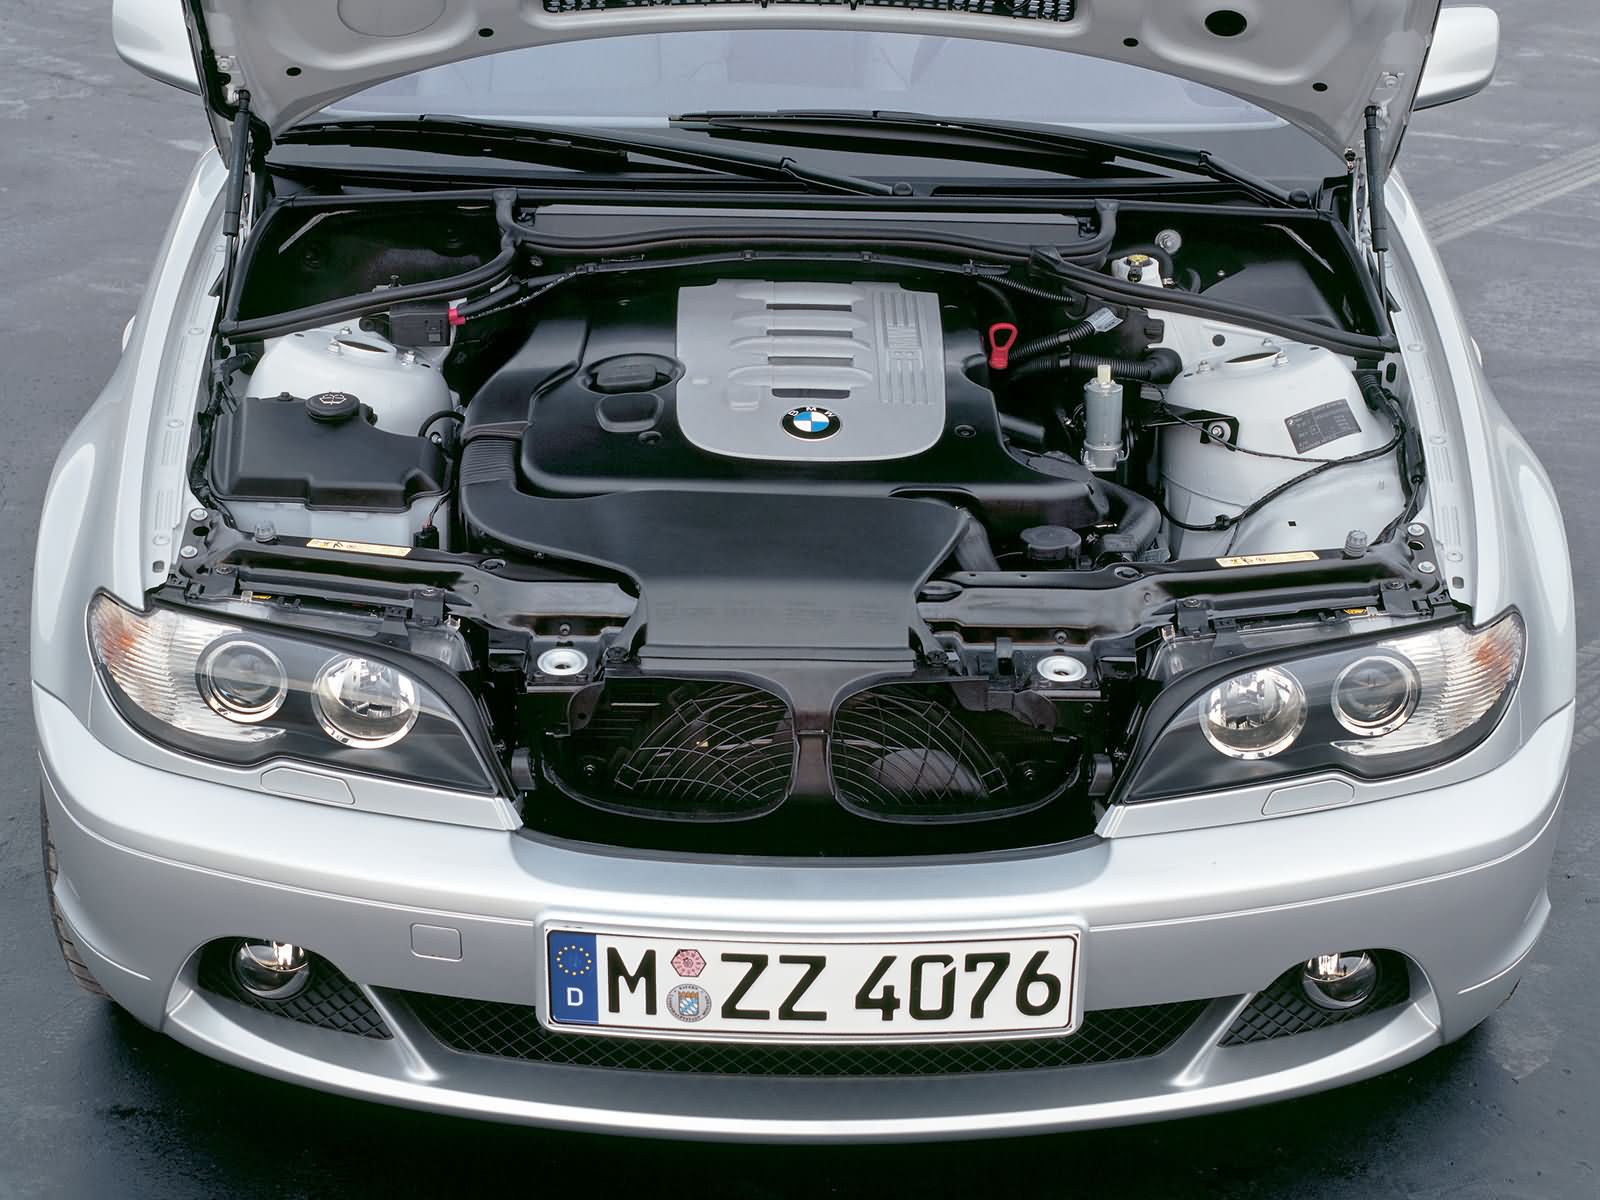 2004 BMW 330Cd Coupe Engine (+) Res: 1600x1200 / Size:209kb. Views: 58